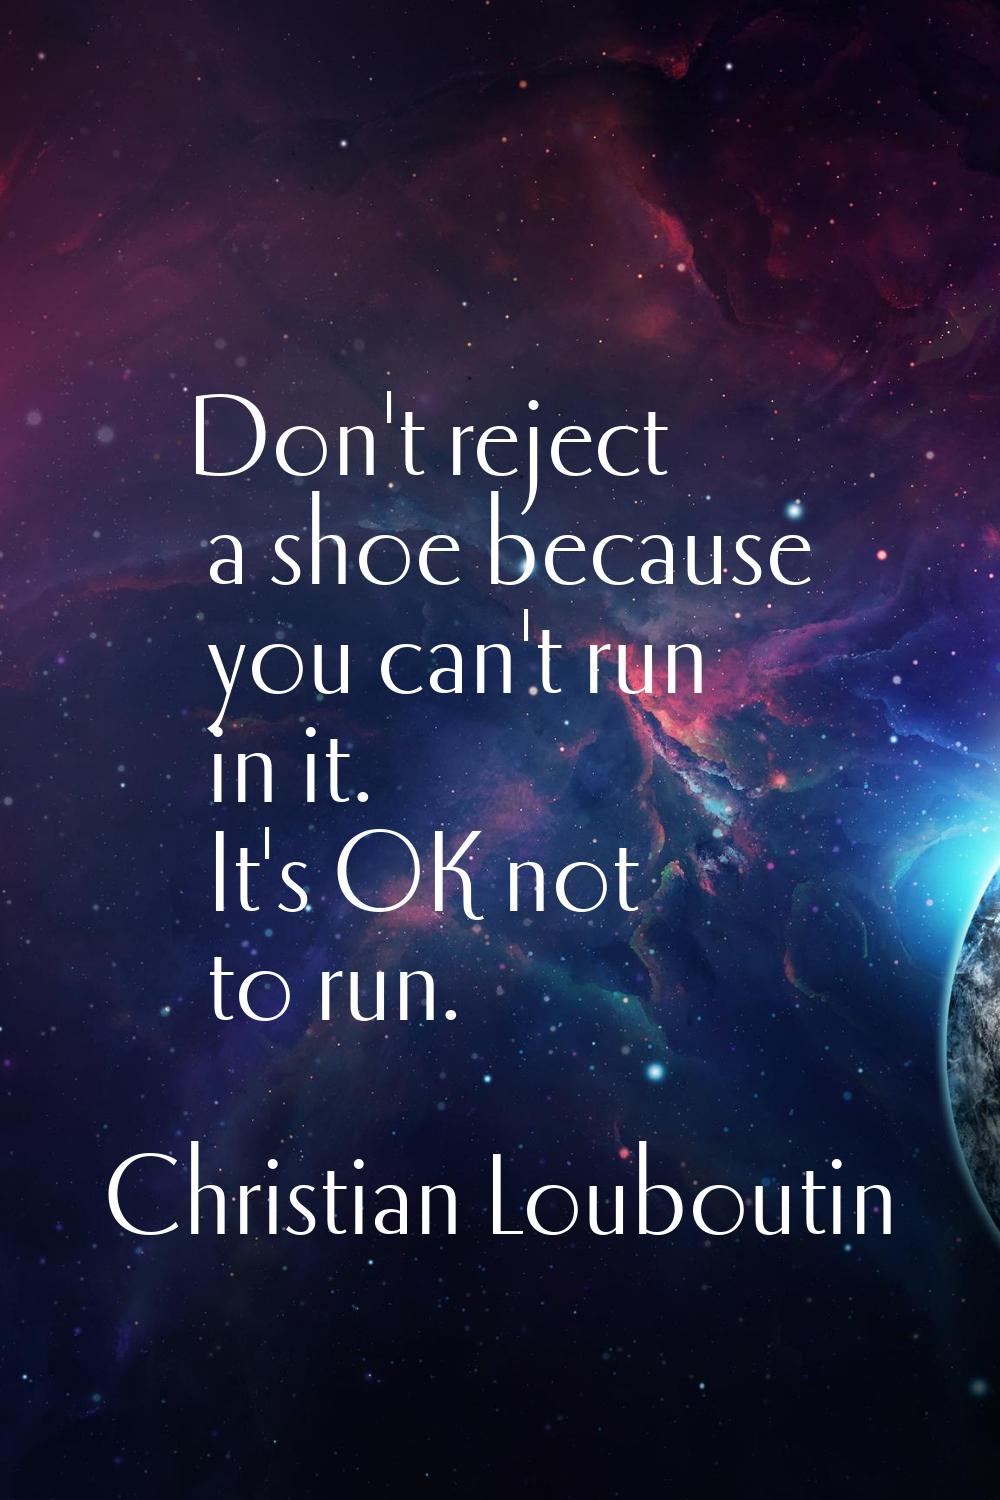 Don't reject a shoe because you can't run in it. It's OK not to run.